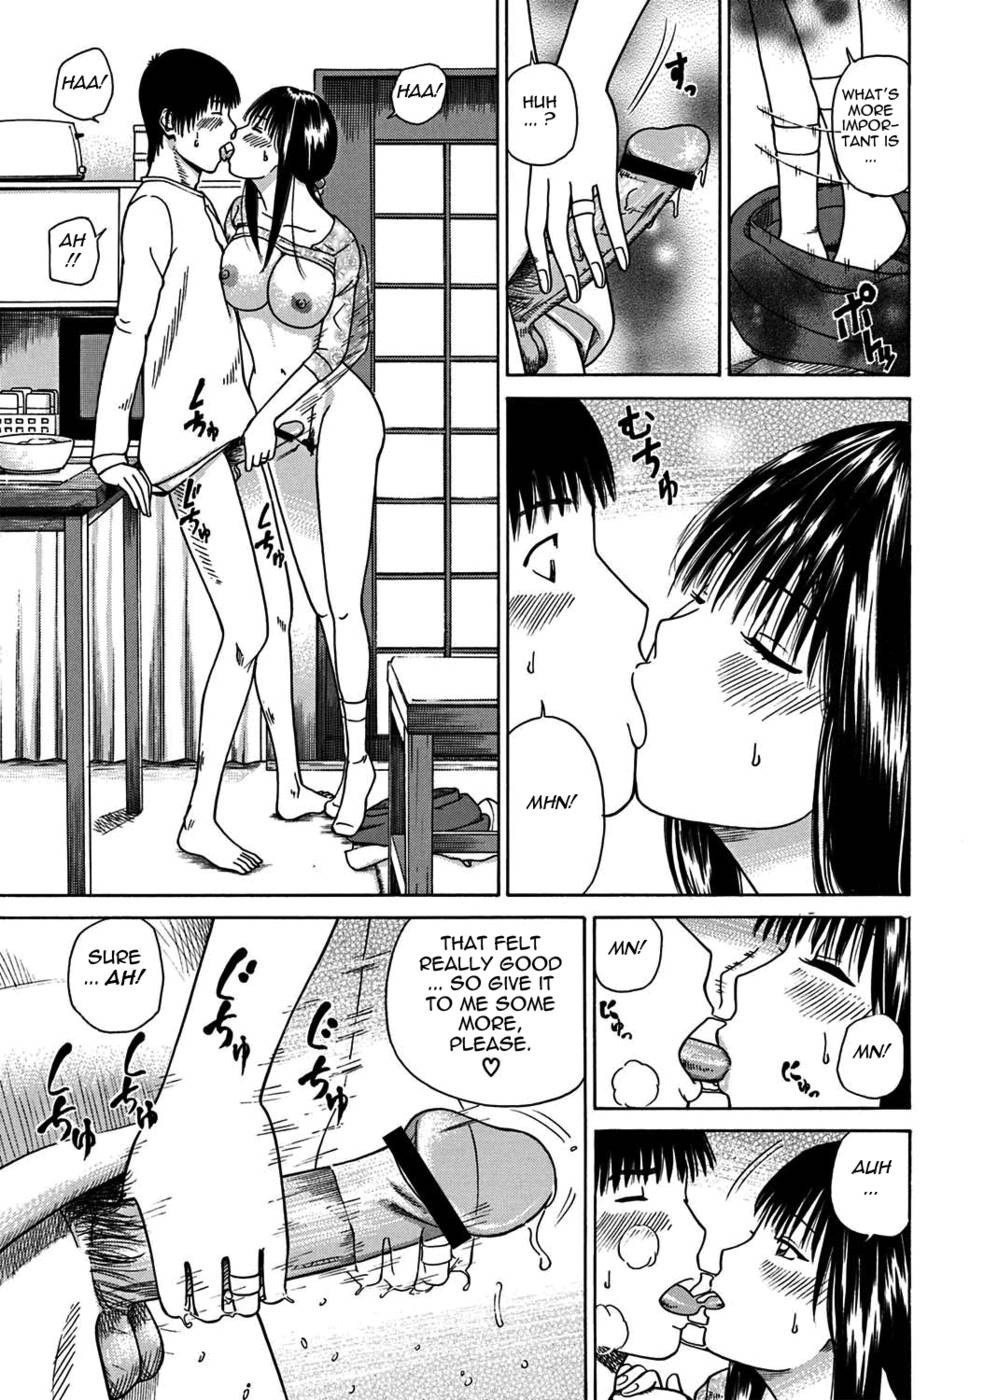 Hentai Manga Comic-33 Year Old Unsatisfied Wife-Chapter 10-Let's Just Do It-15